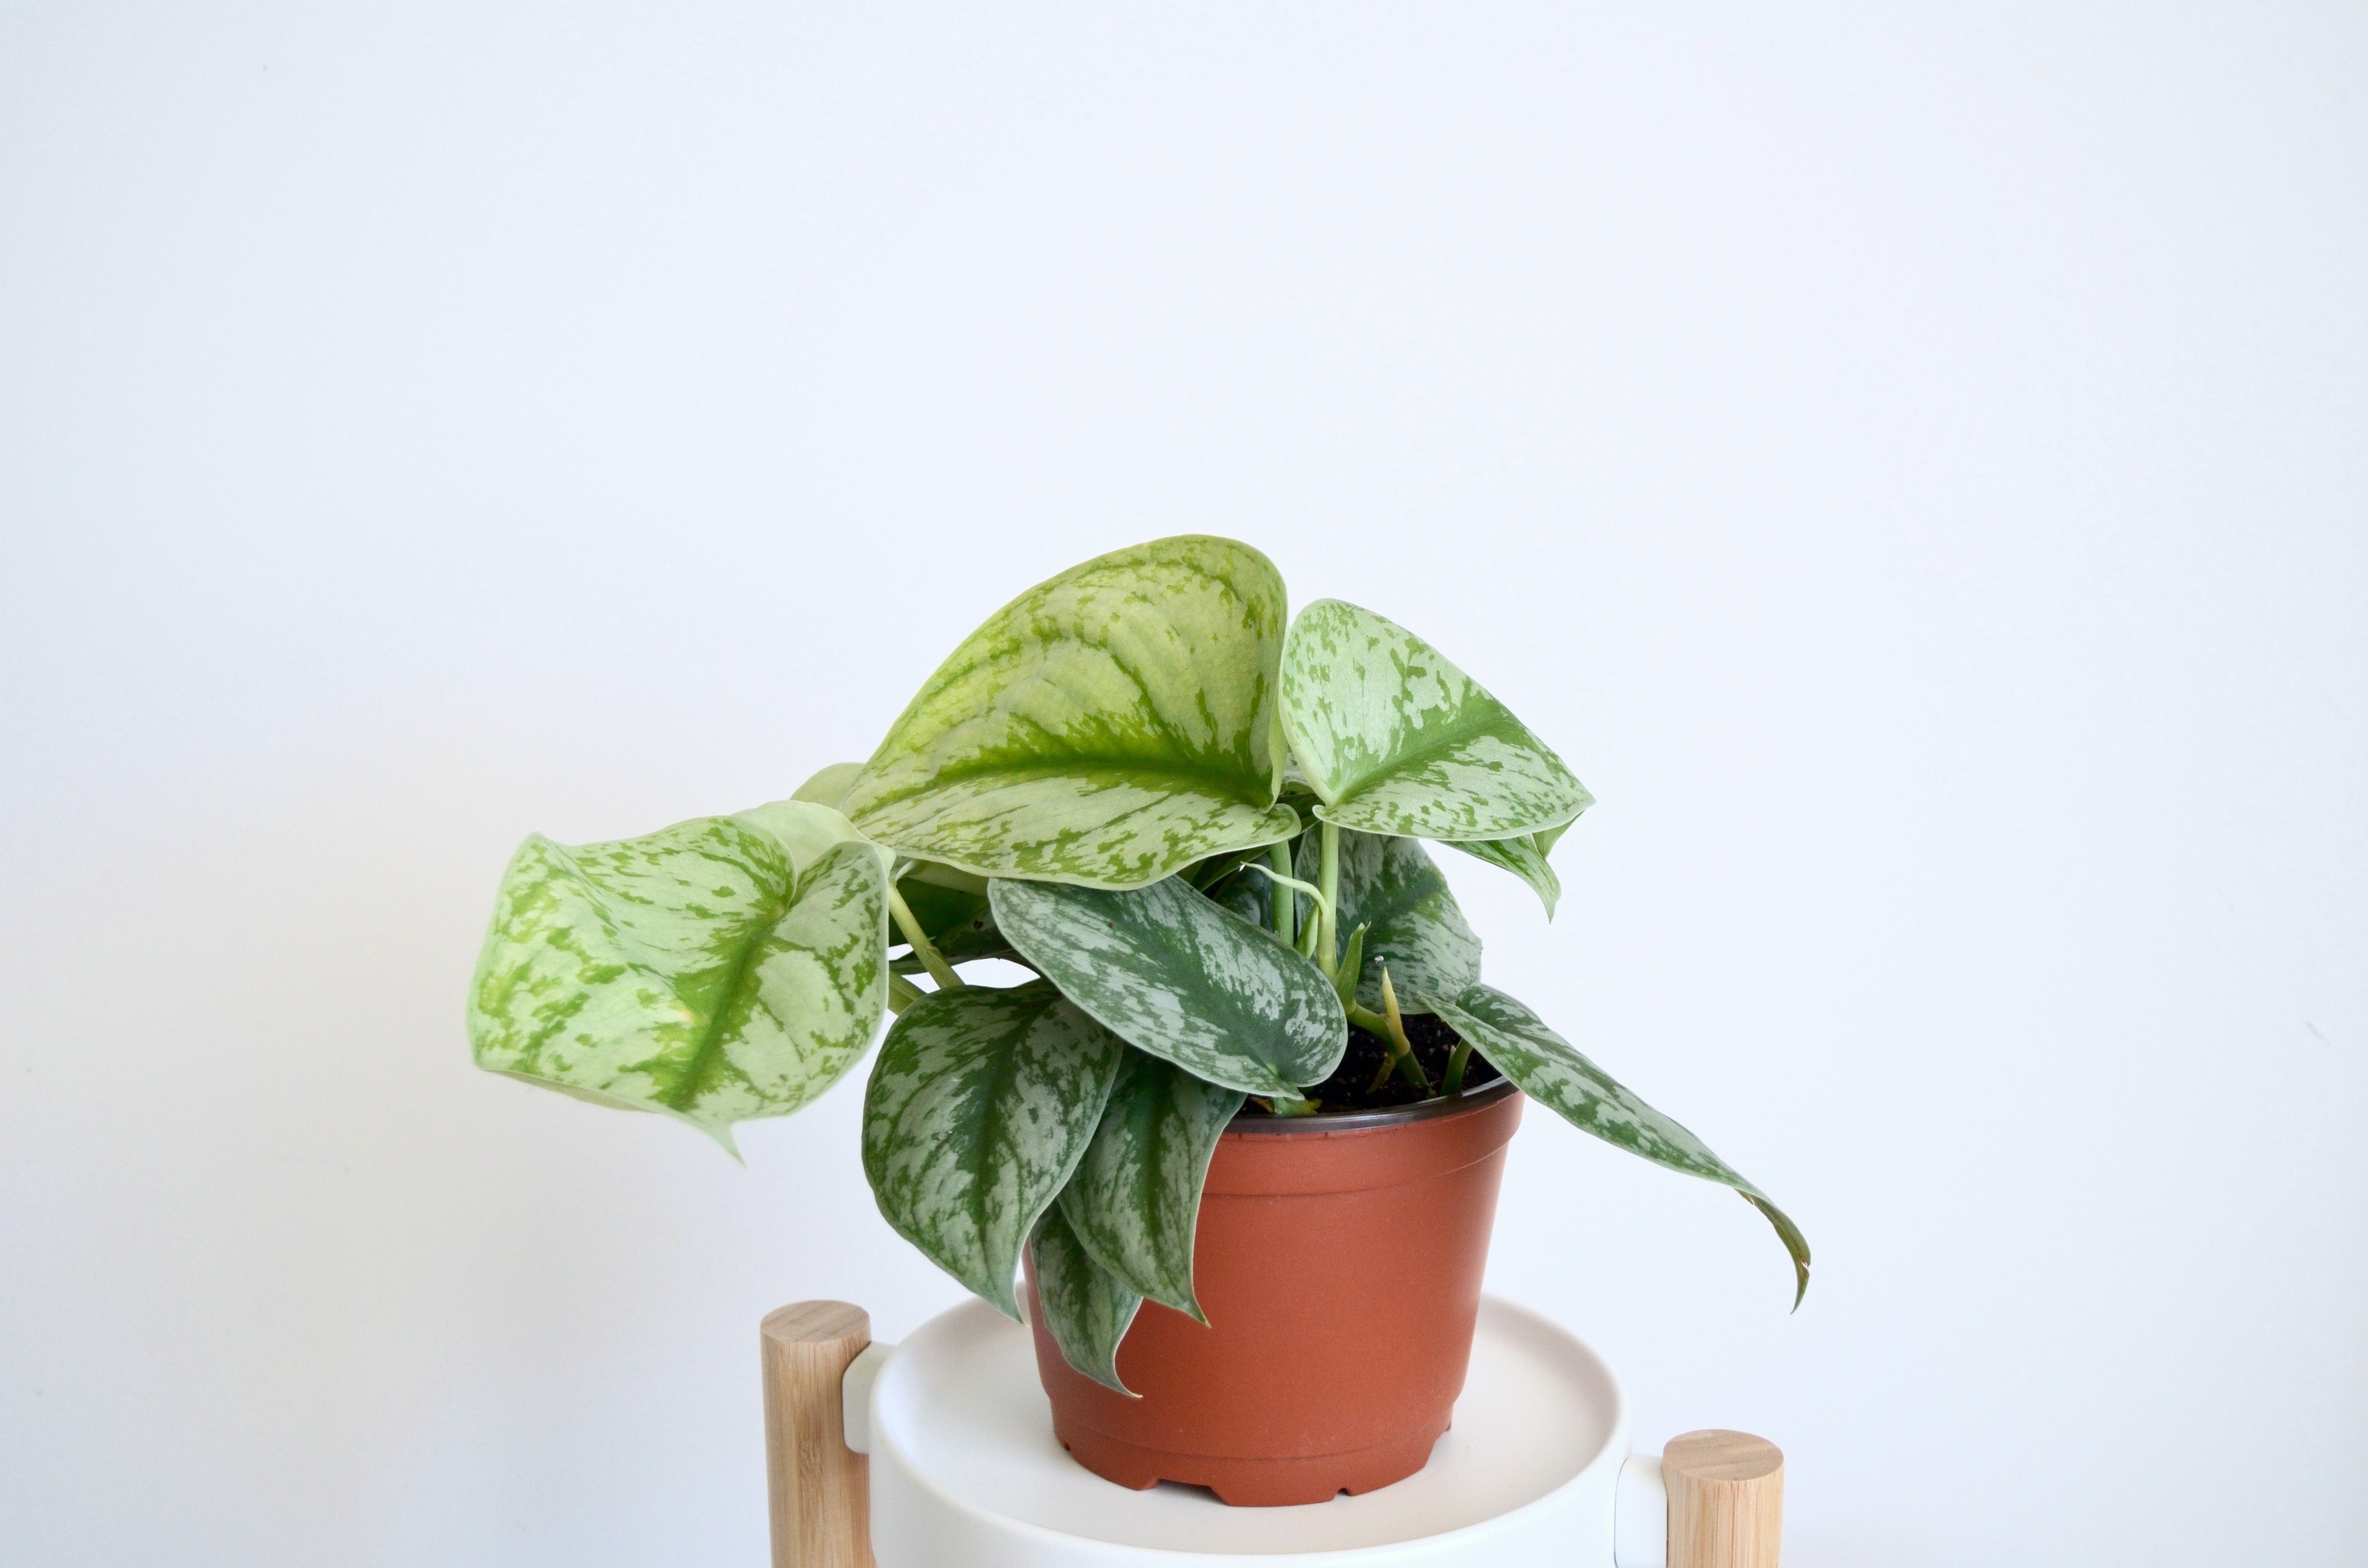 Silver Satin Pothos: An 'About Me' Guide With Care & Details